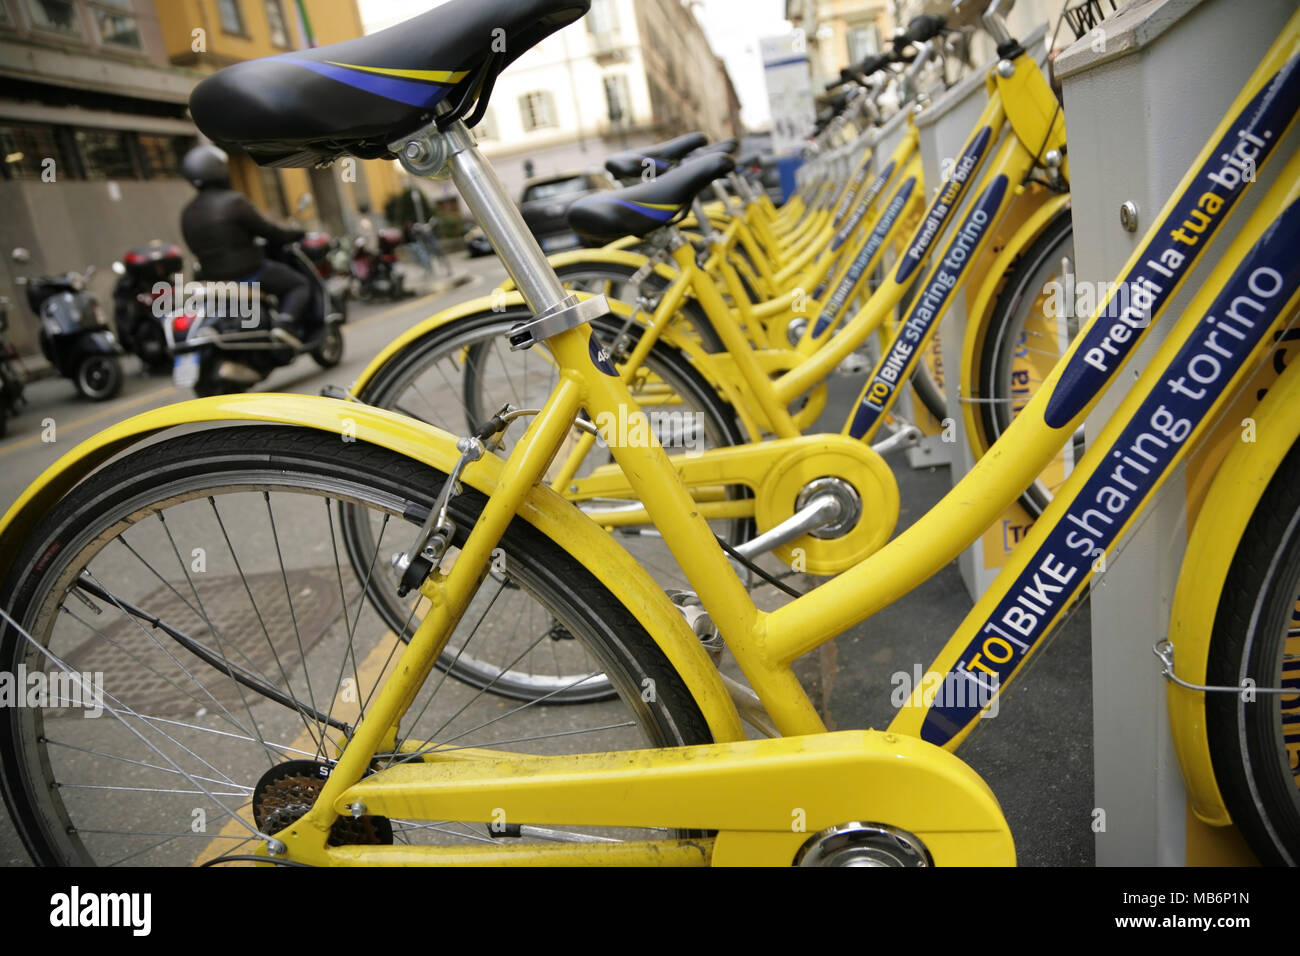 Cycles for hire, Turin, Italy. Stock Photo